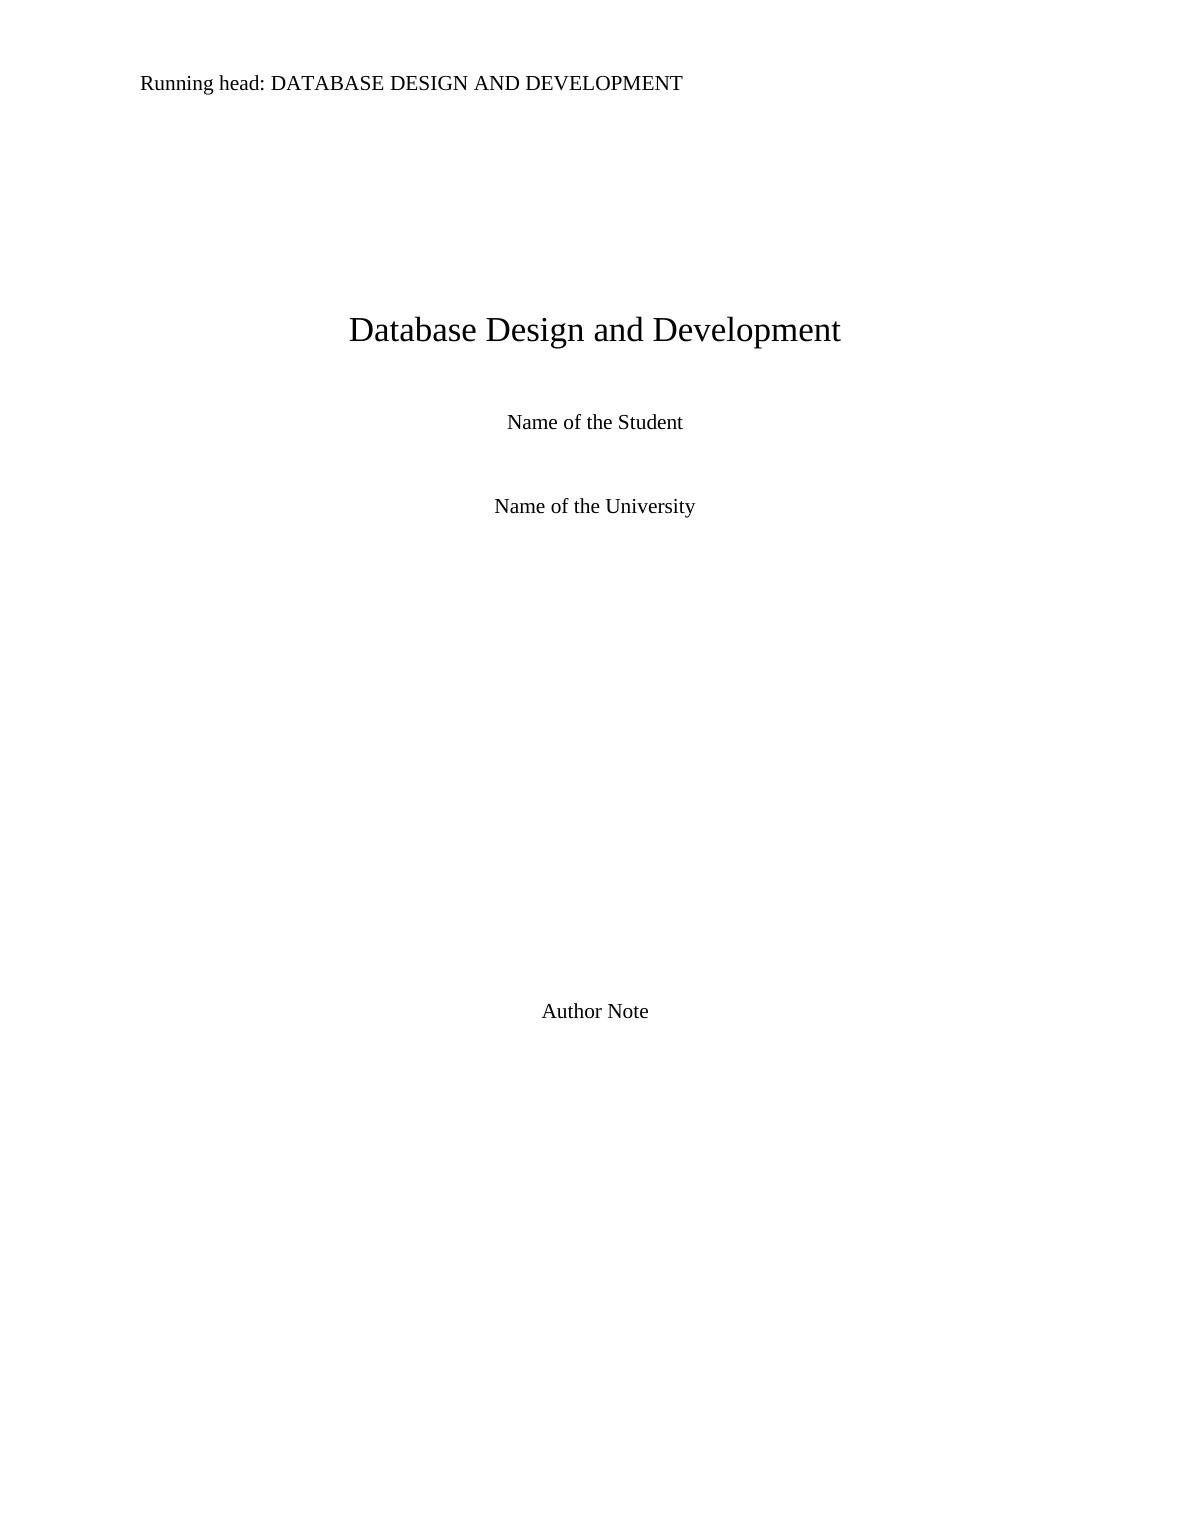 Database Design and Development | Assignment_1